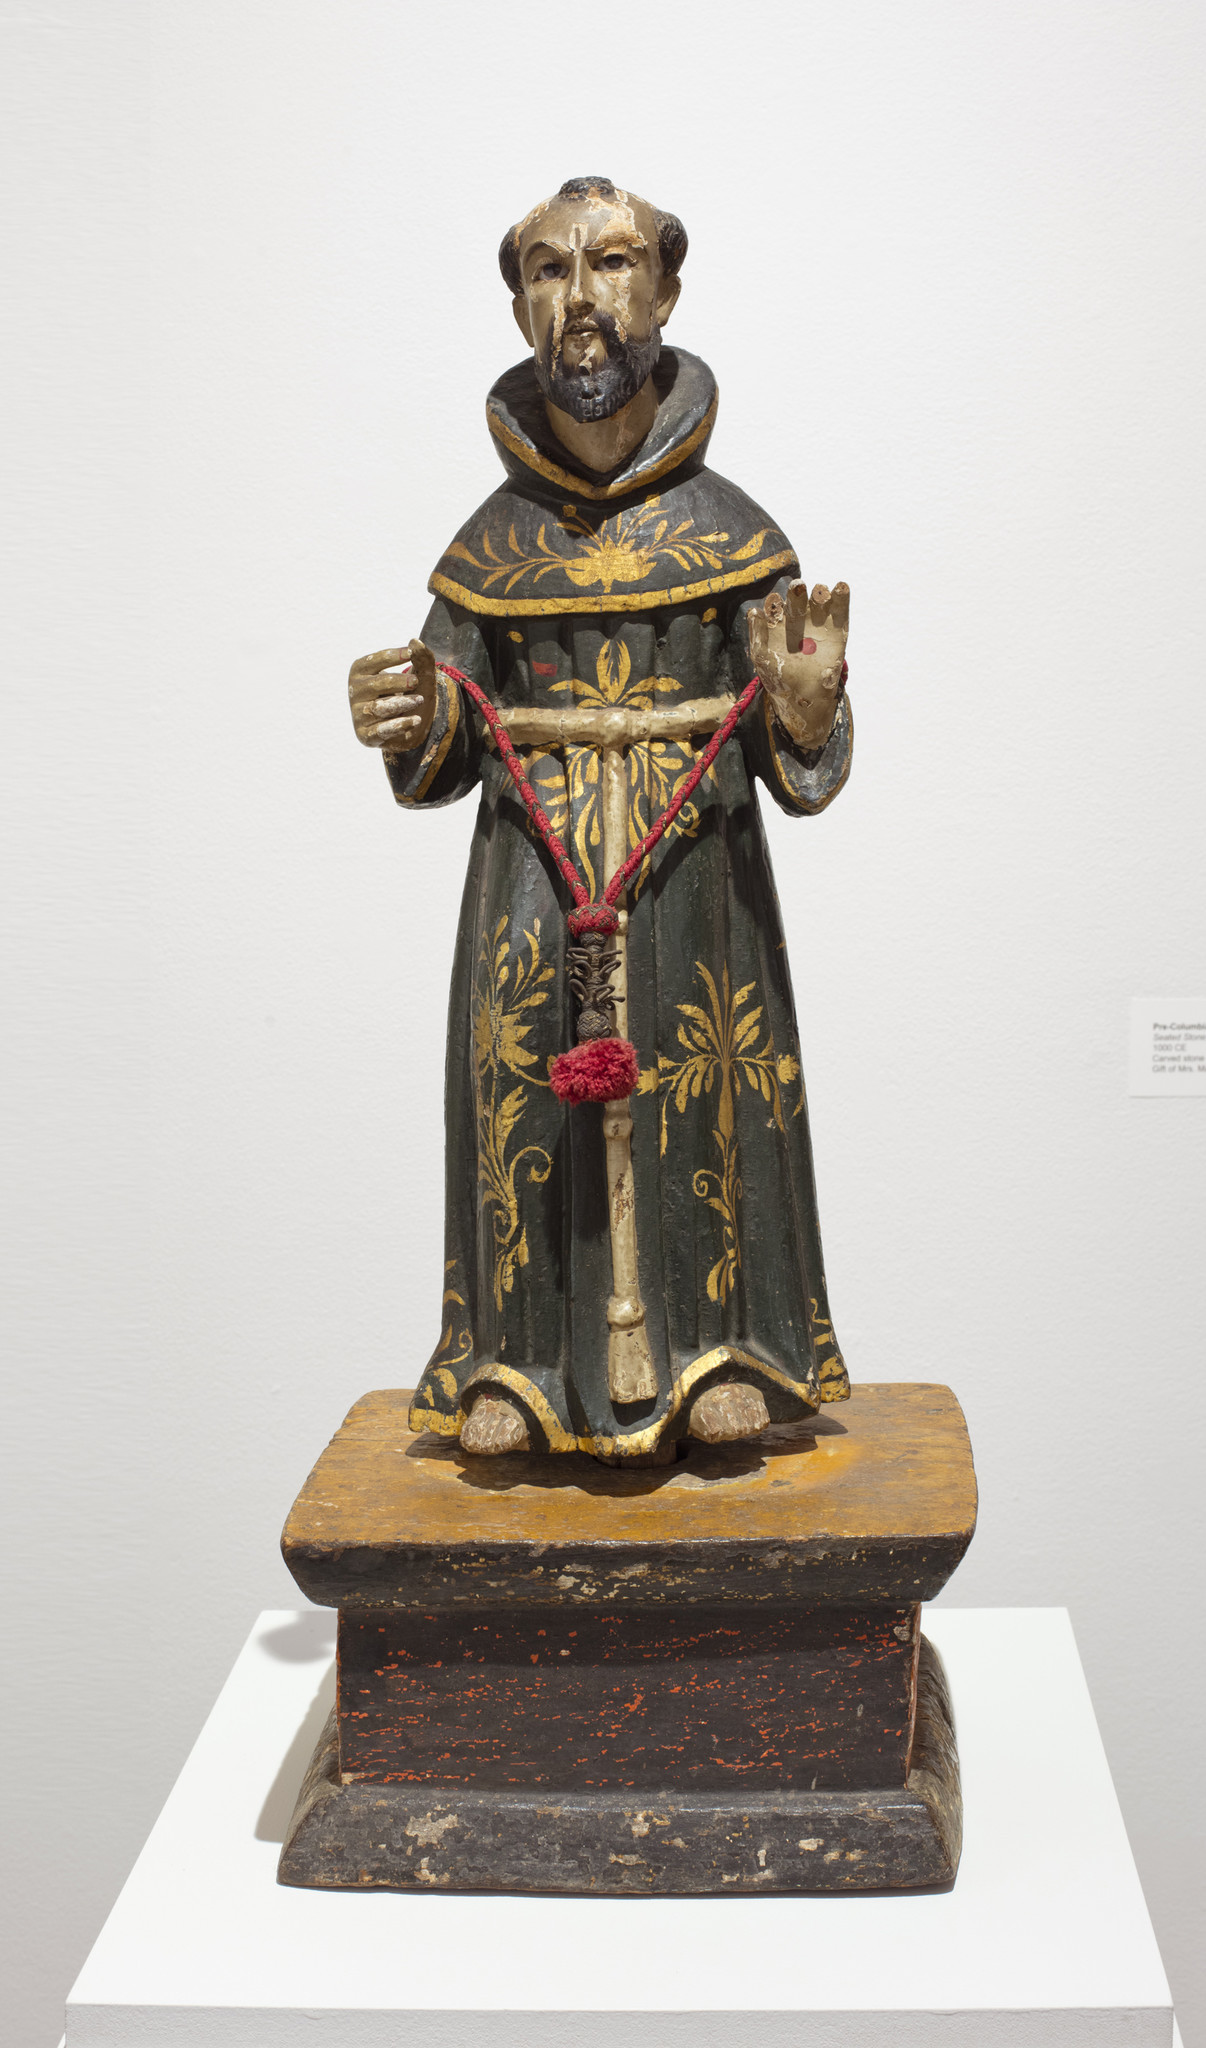 A carving of a priest made during the Spanish colonial era in California (c. 1725), part of "Sacred Art in the Age of Contact."